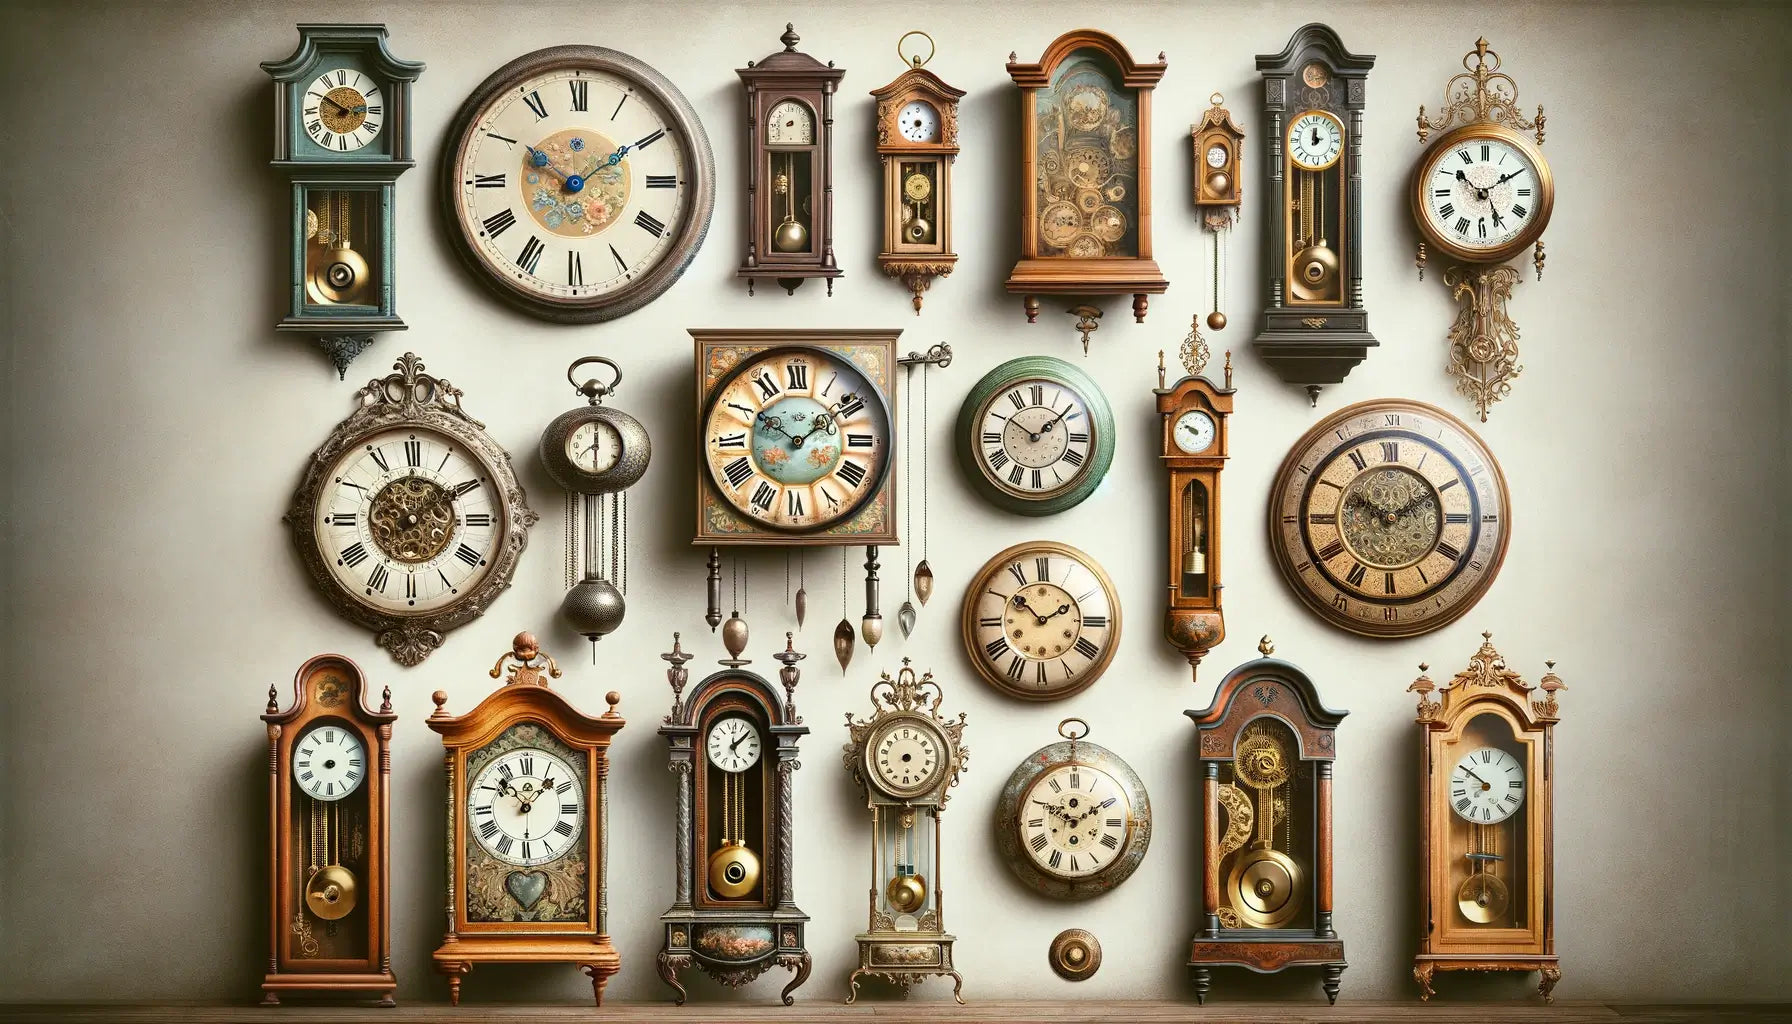 Types of Antique Wall Clocks | Love gadgets